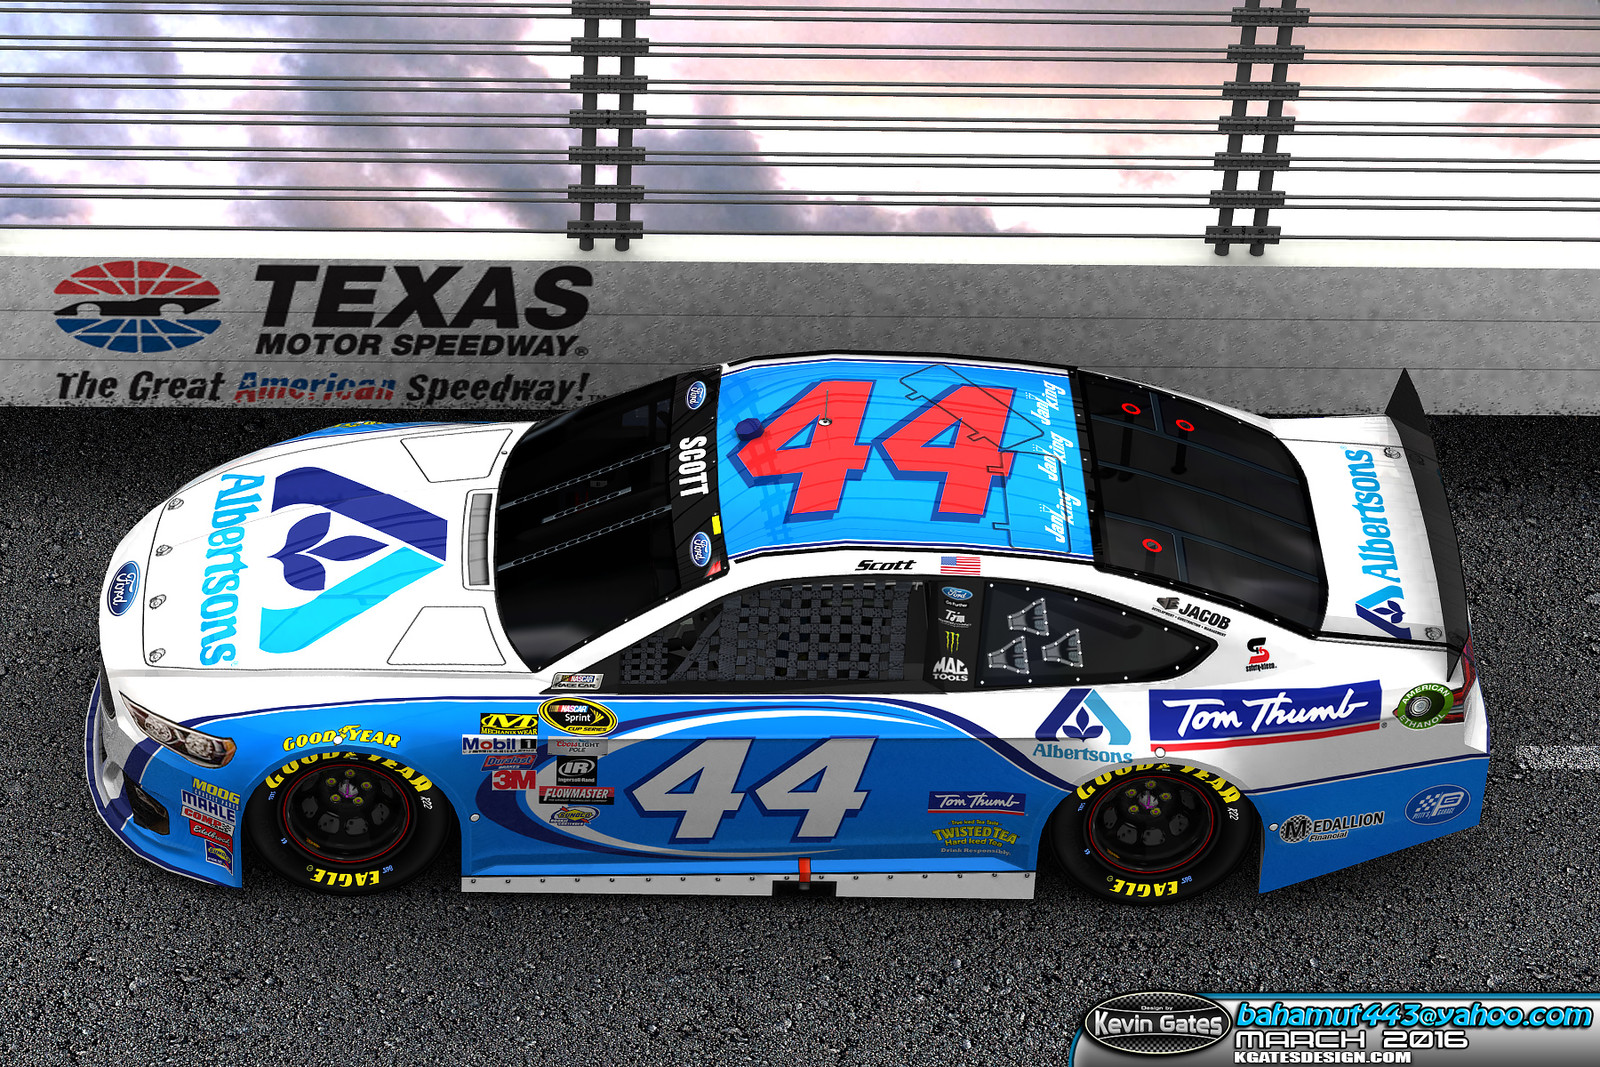 Original Autodesk 3DS Max track render of the finalized 2016 #44 Albertsons / Tom Thumb Ford Fusion driven by NASCAR Sprint Cup Series driver Brian Scott of Richard Petty Motorsports